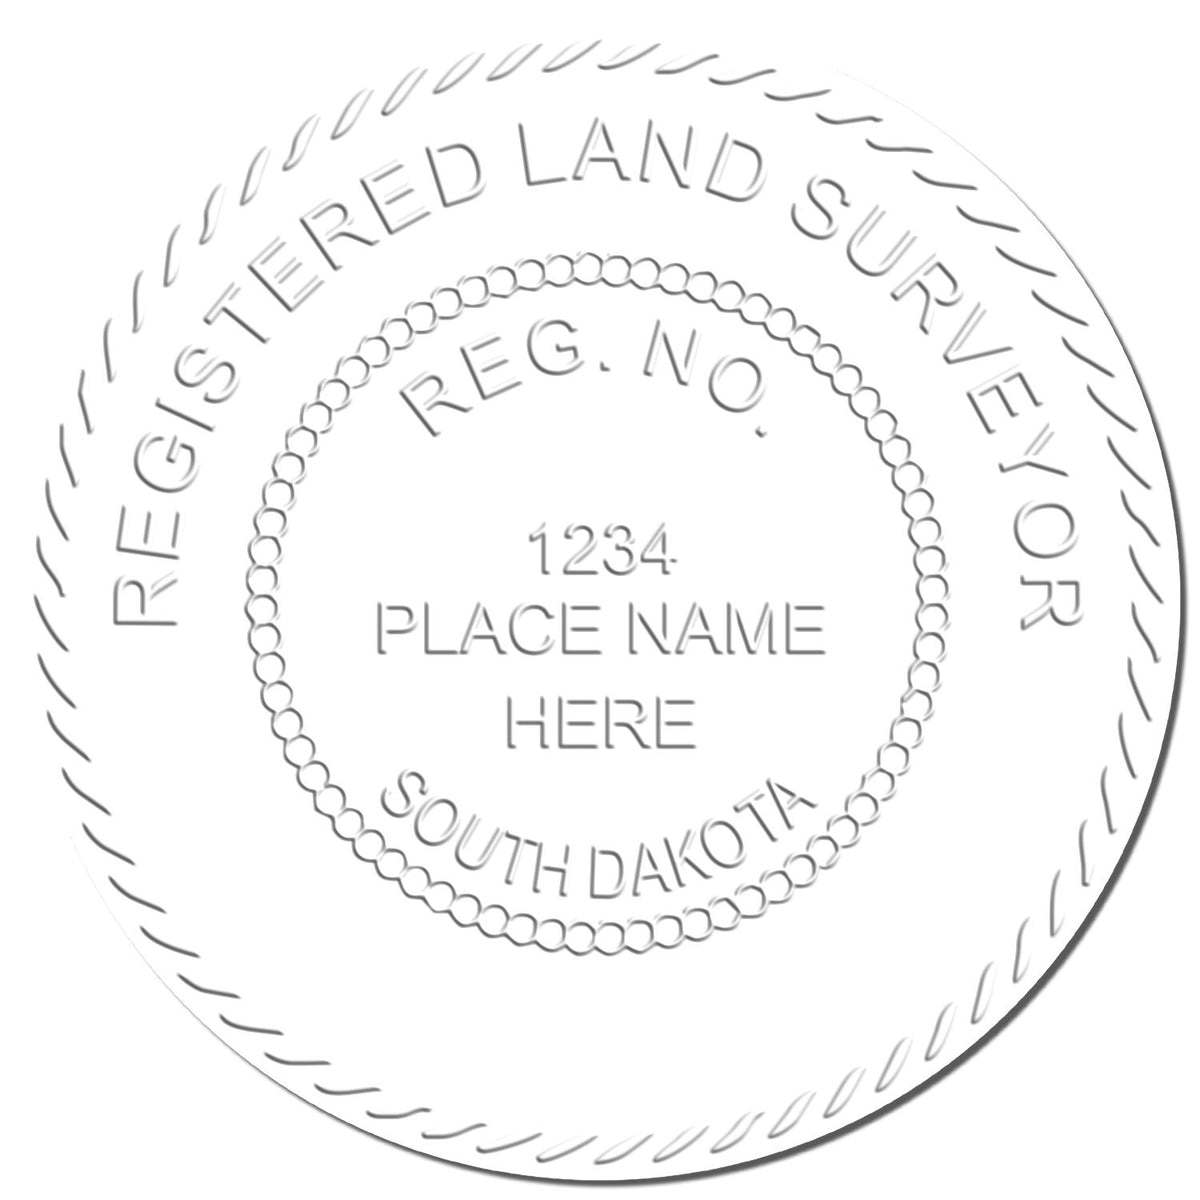 This paper is stamped with a sample imprint of the Gift South Dakota Land Surveyor Seal, signifying its quality and reliability.